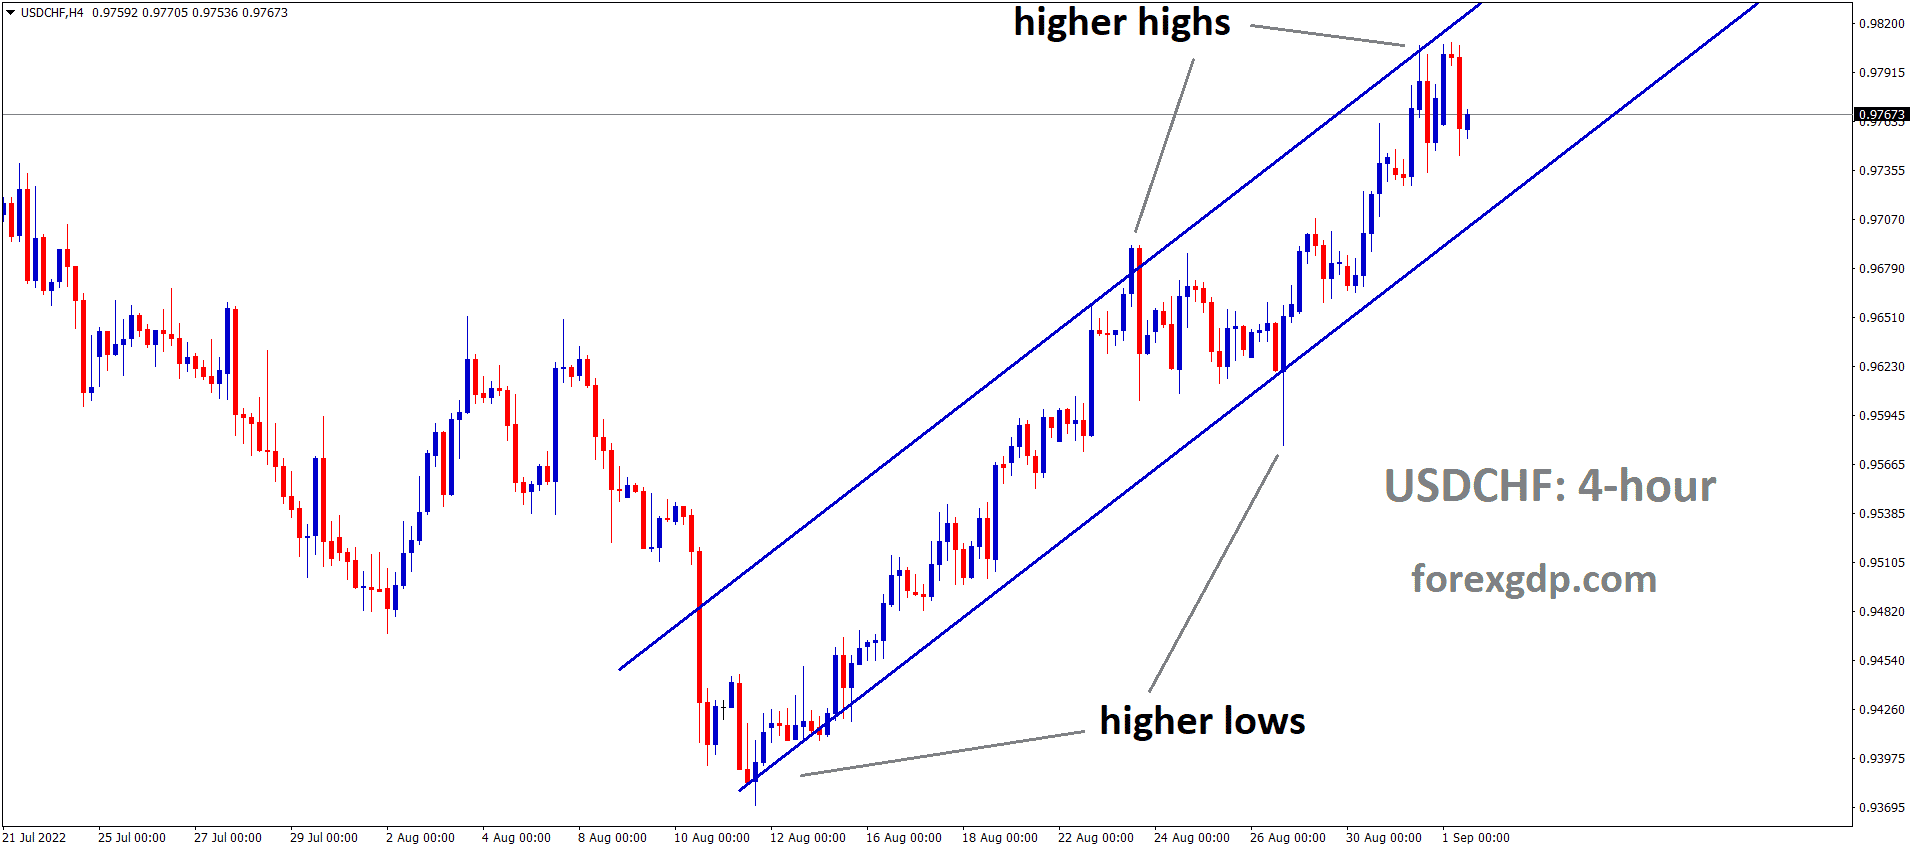 USDCHF is moving in an Ascending channel and the market has fallen from the higher high area of the channel